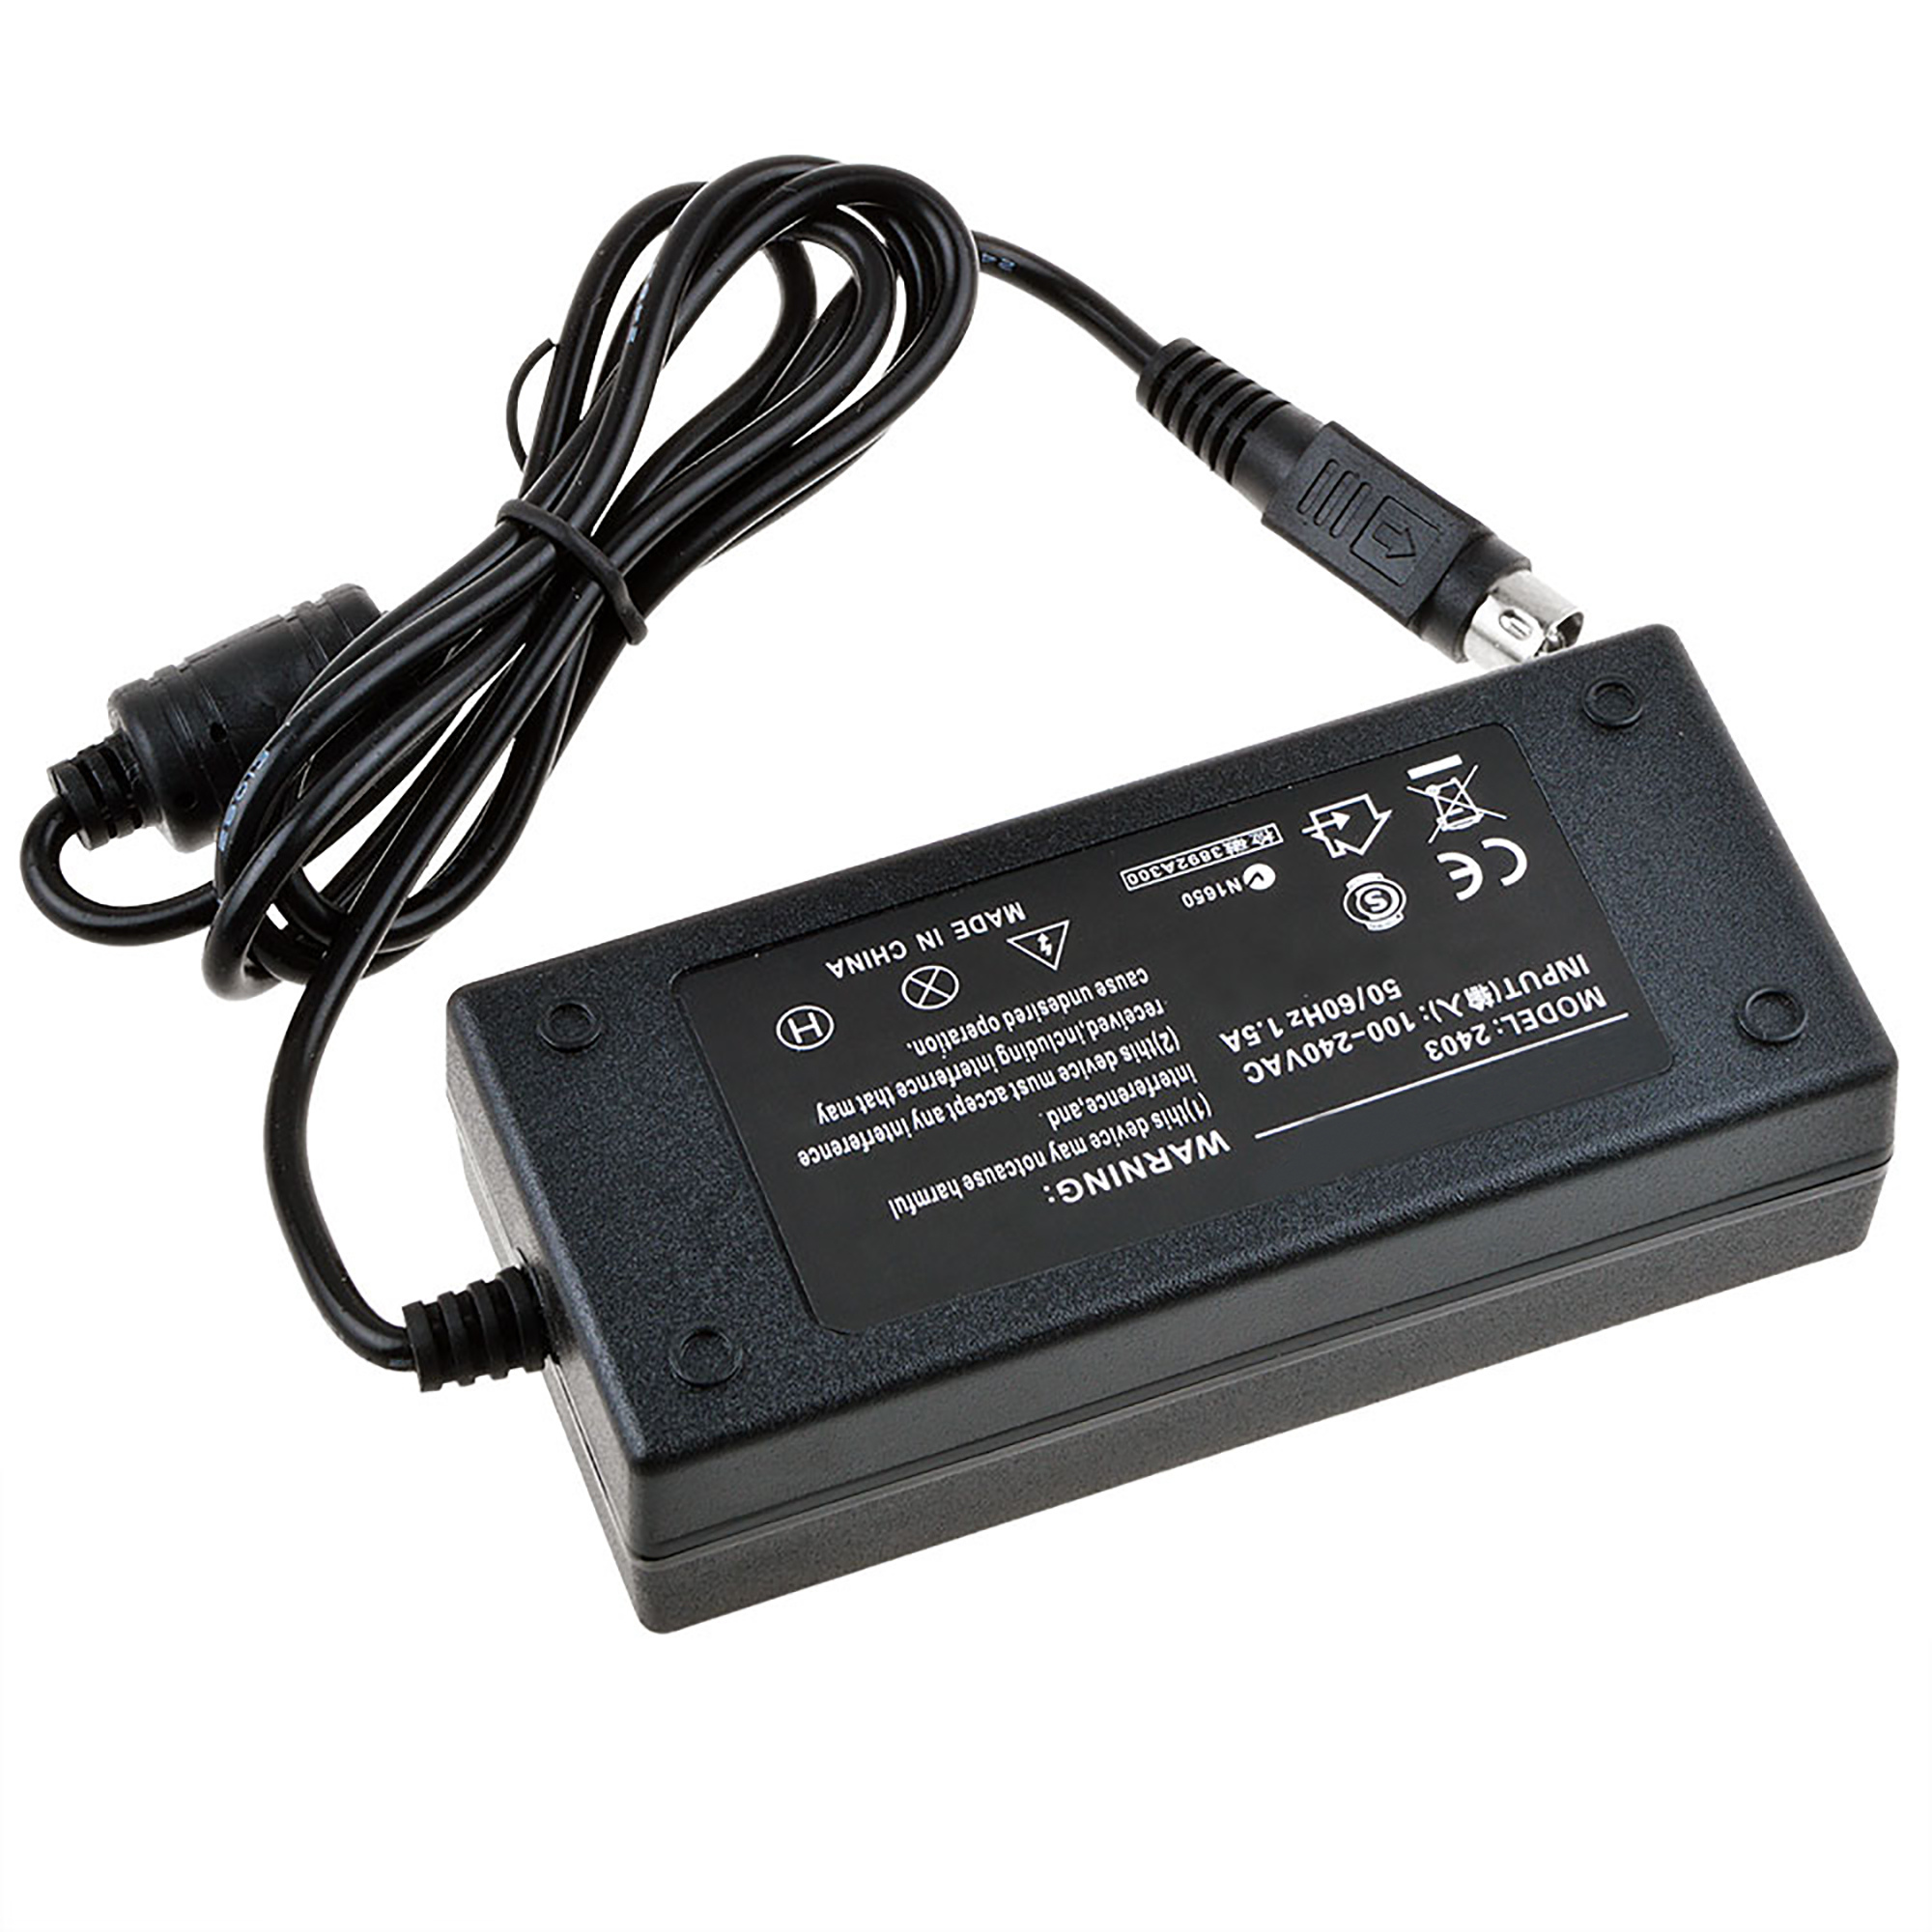 PKPOWER 4-Pin AC DC Adapter For StarTech SATDOCK4U3E SATDOCK4U3RE SDOCK4U33 S3540BU33E SAT35401U 4 Bay eSATA USB 3.0 to SATA HD Docking Station Hard Disk Drive Enclosure HDD Star Tech Power Supply - image 5 of 5